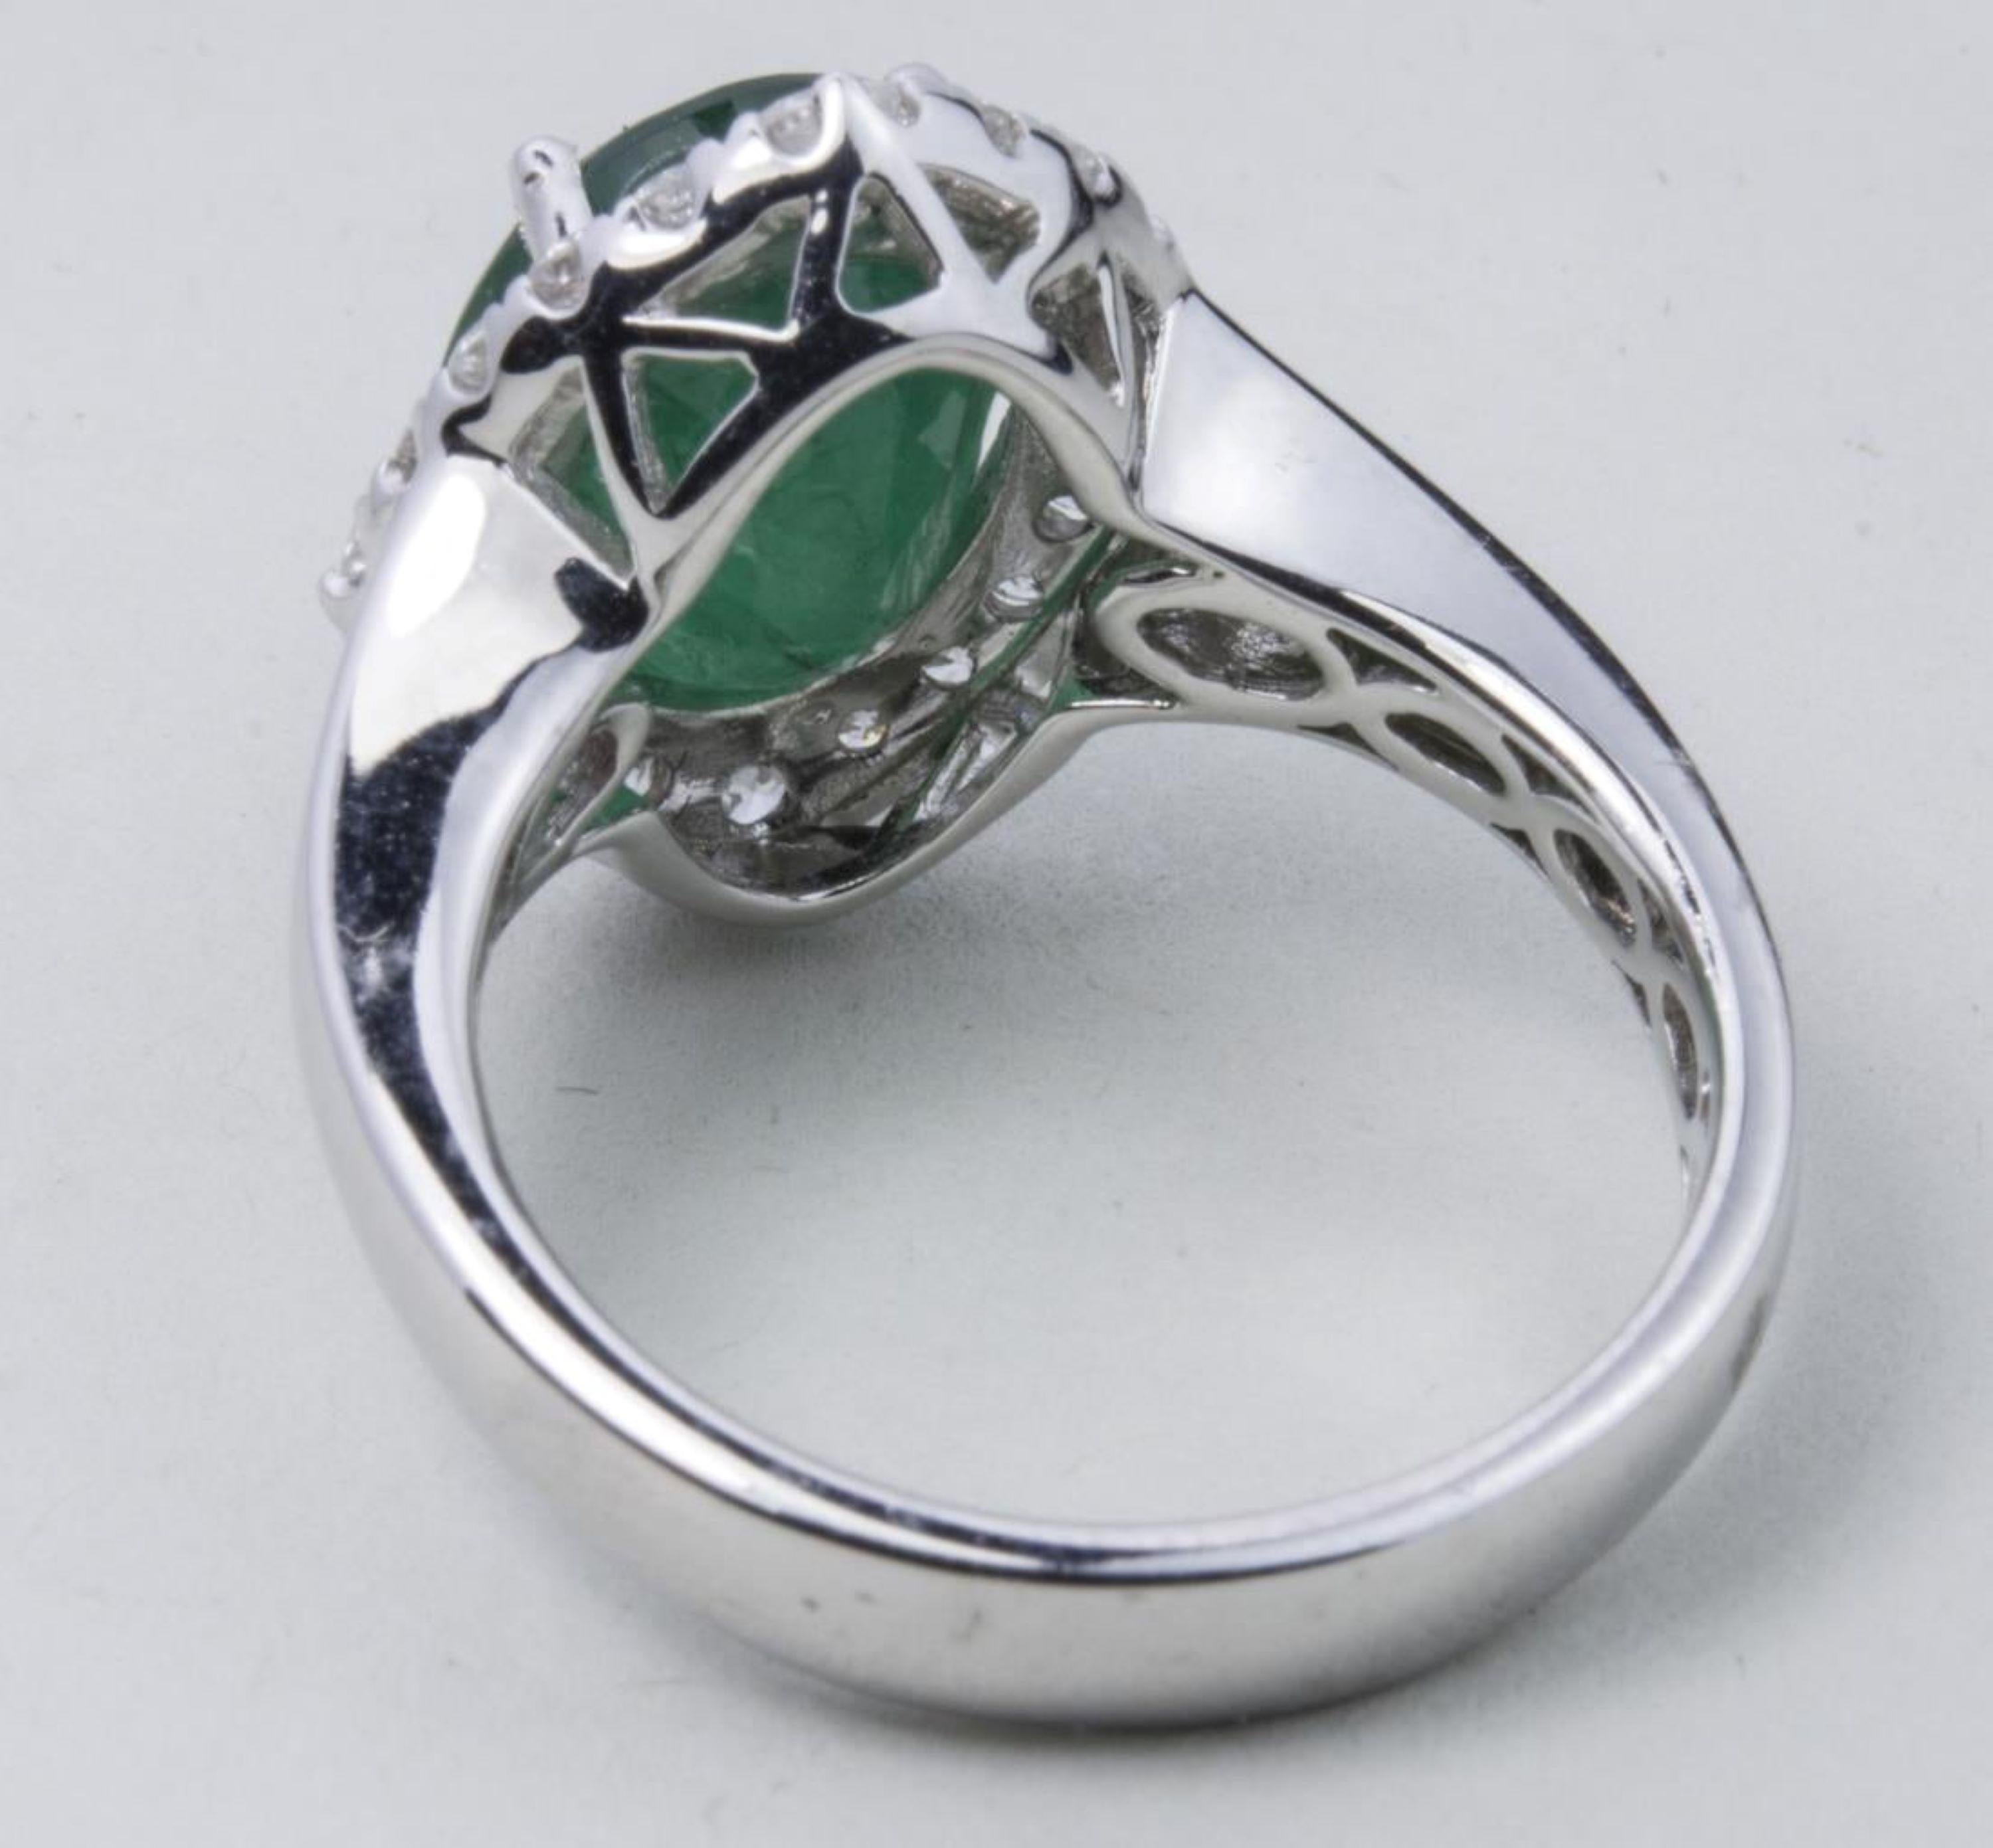 18k white gold ring, with a central oval faceted emerald weighing 3.54 carats surrounded by round diamonds weighing a total of .63 carats.  Size 6 3/4